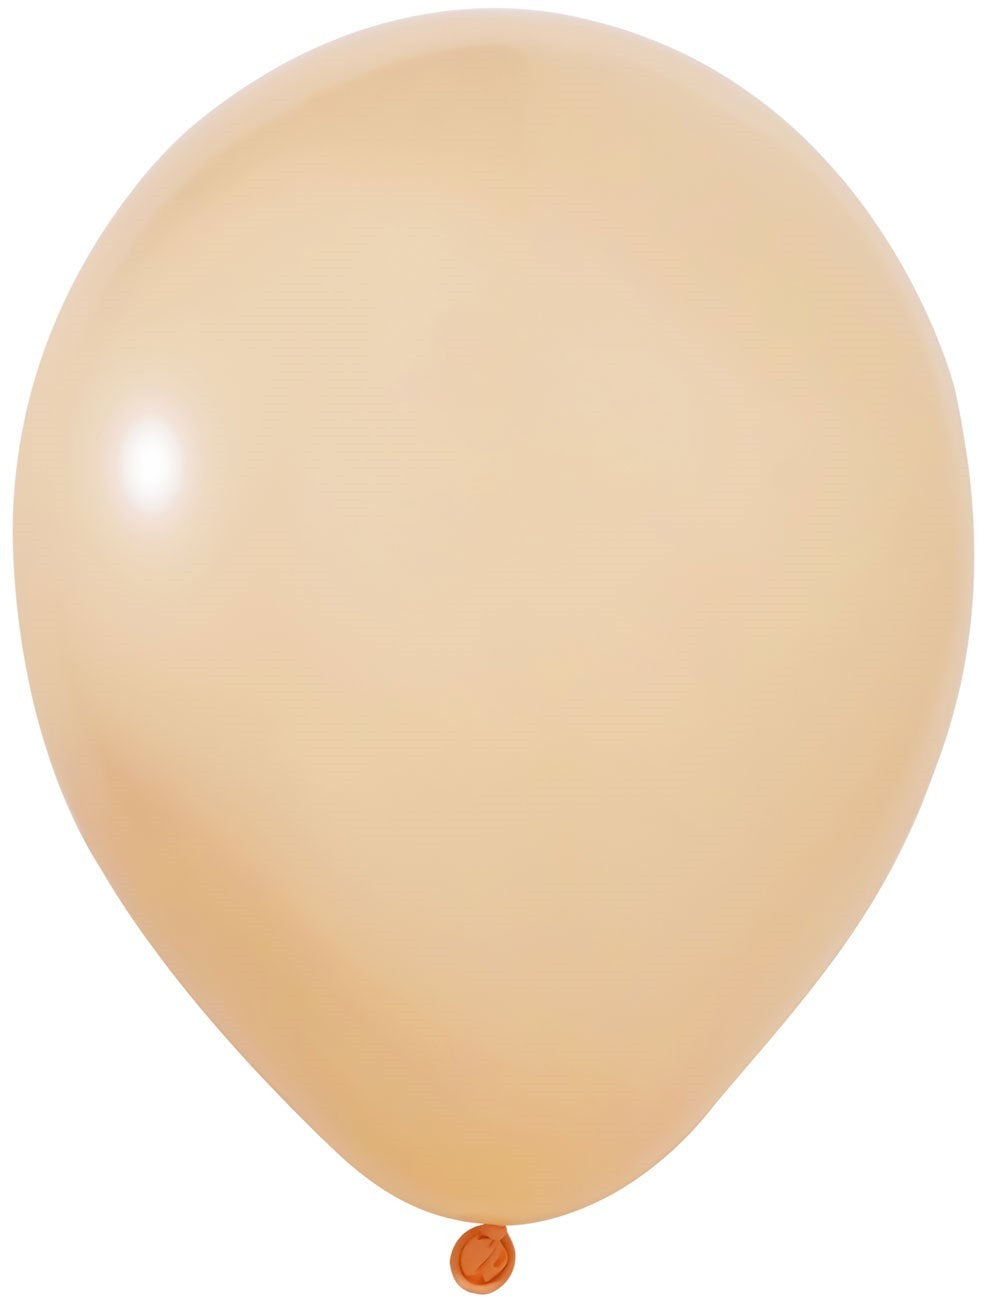 View Salmon Latex Balloon 12inch Pack of 100 information